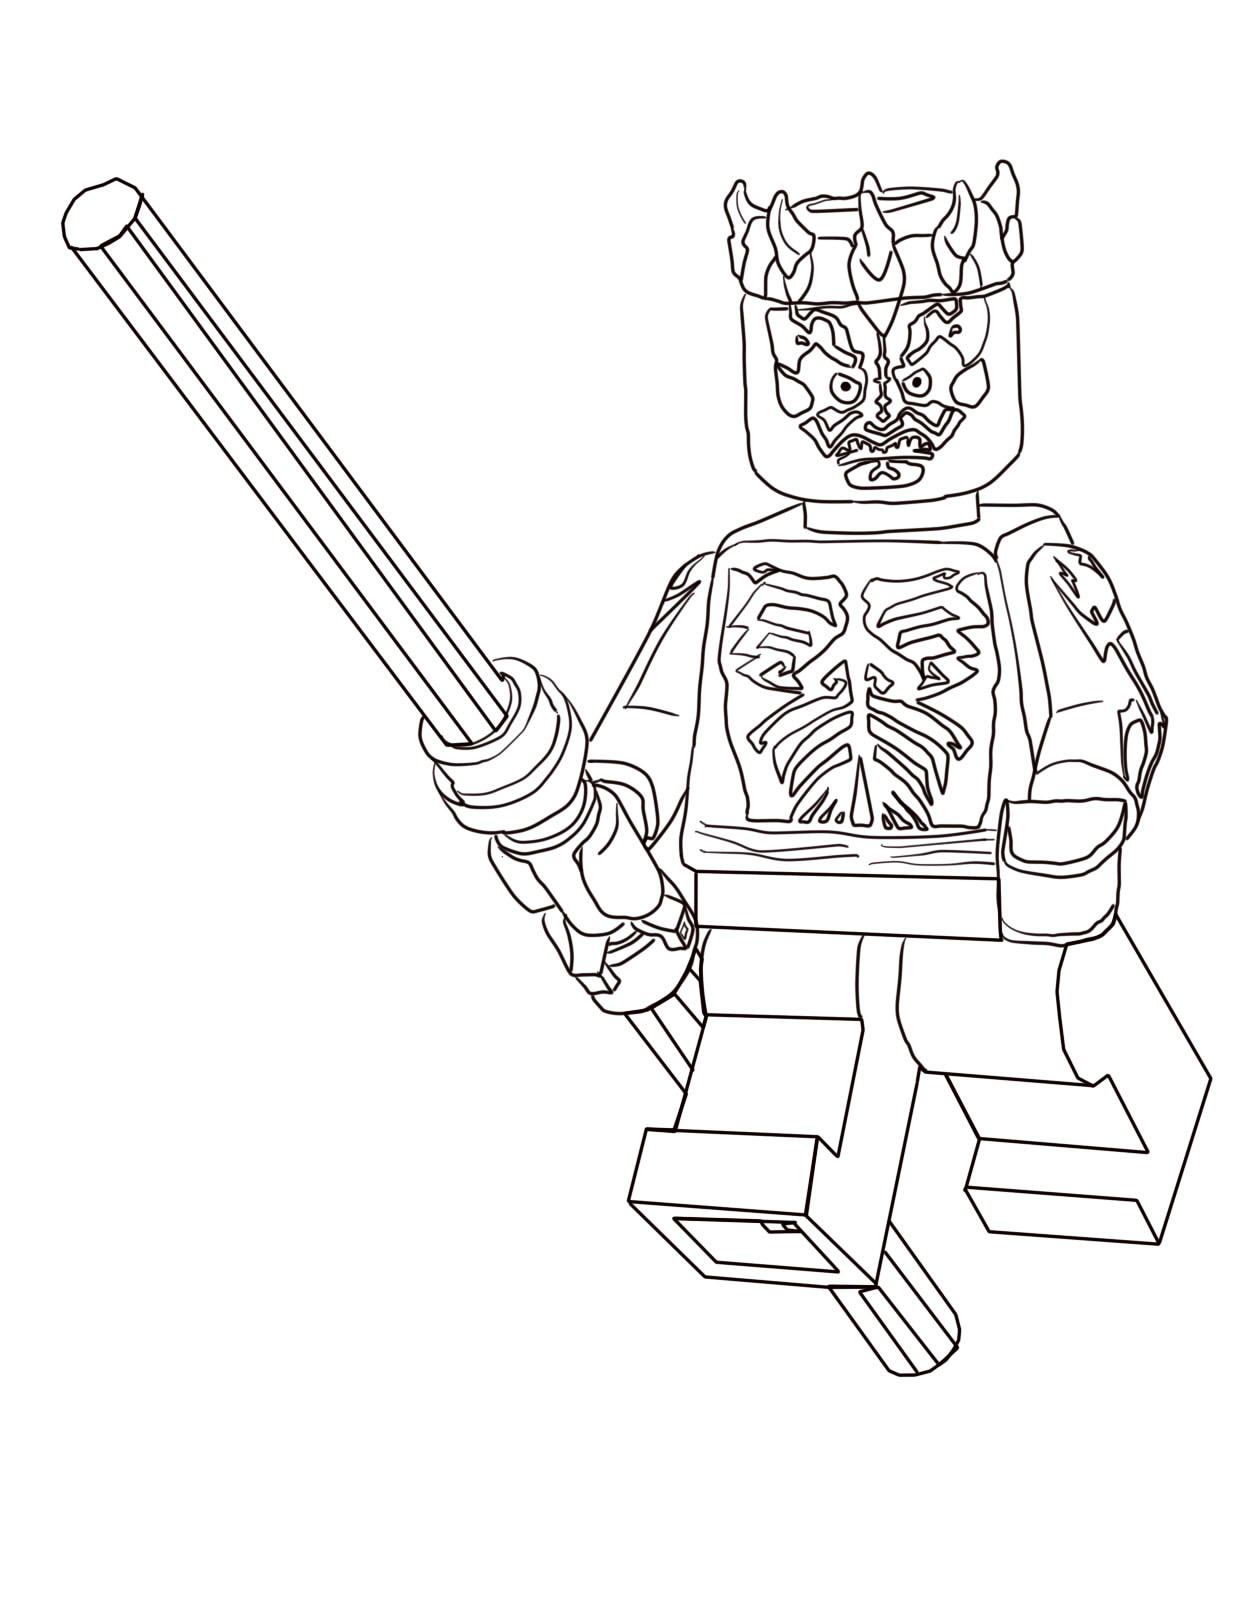 LEGO coloring pages with characters: Chima, Ninjago, City 